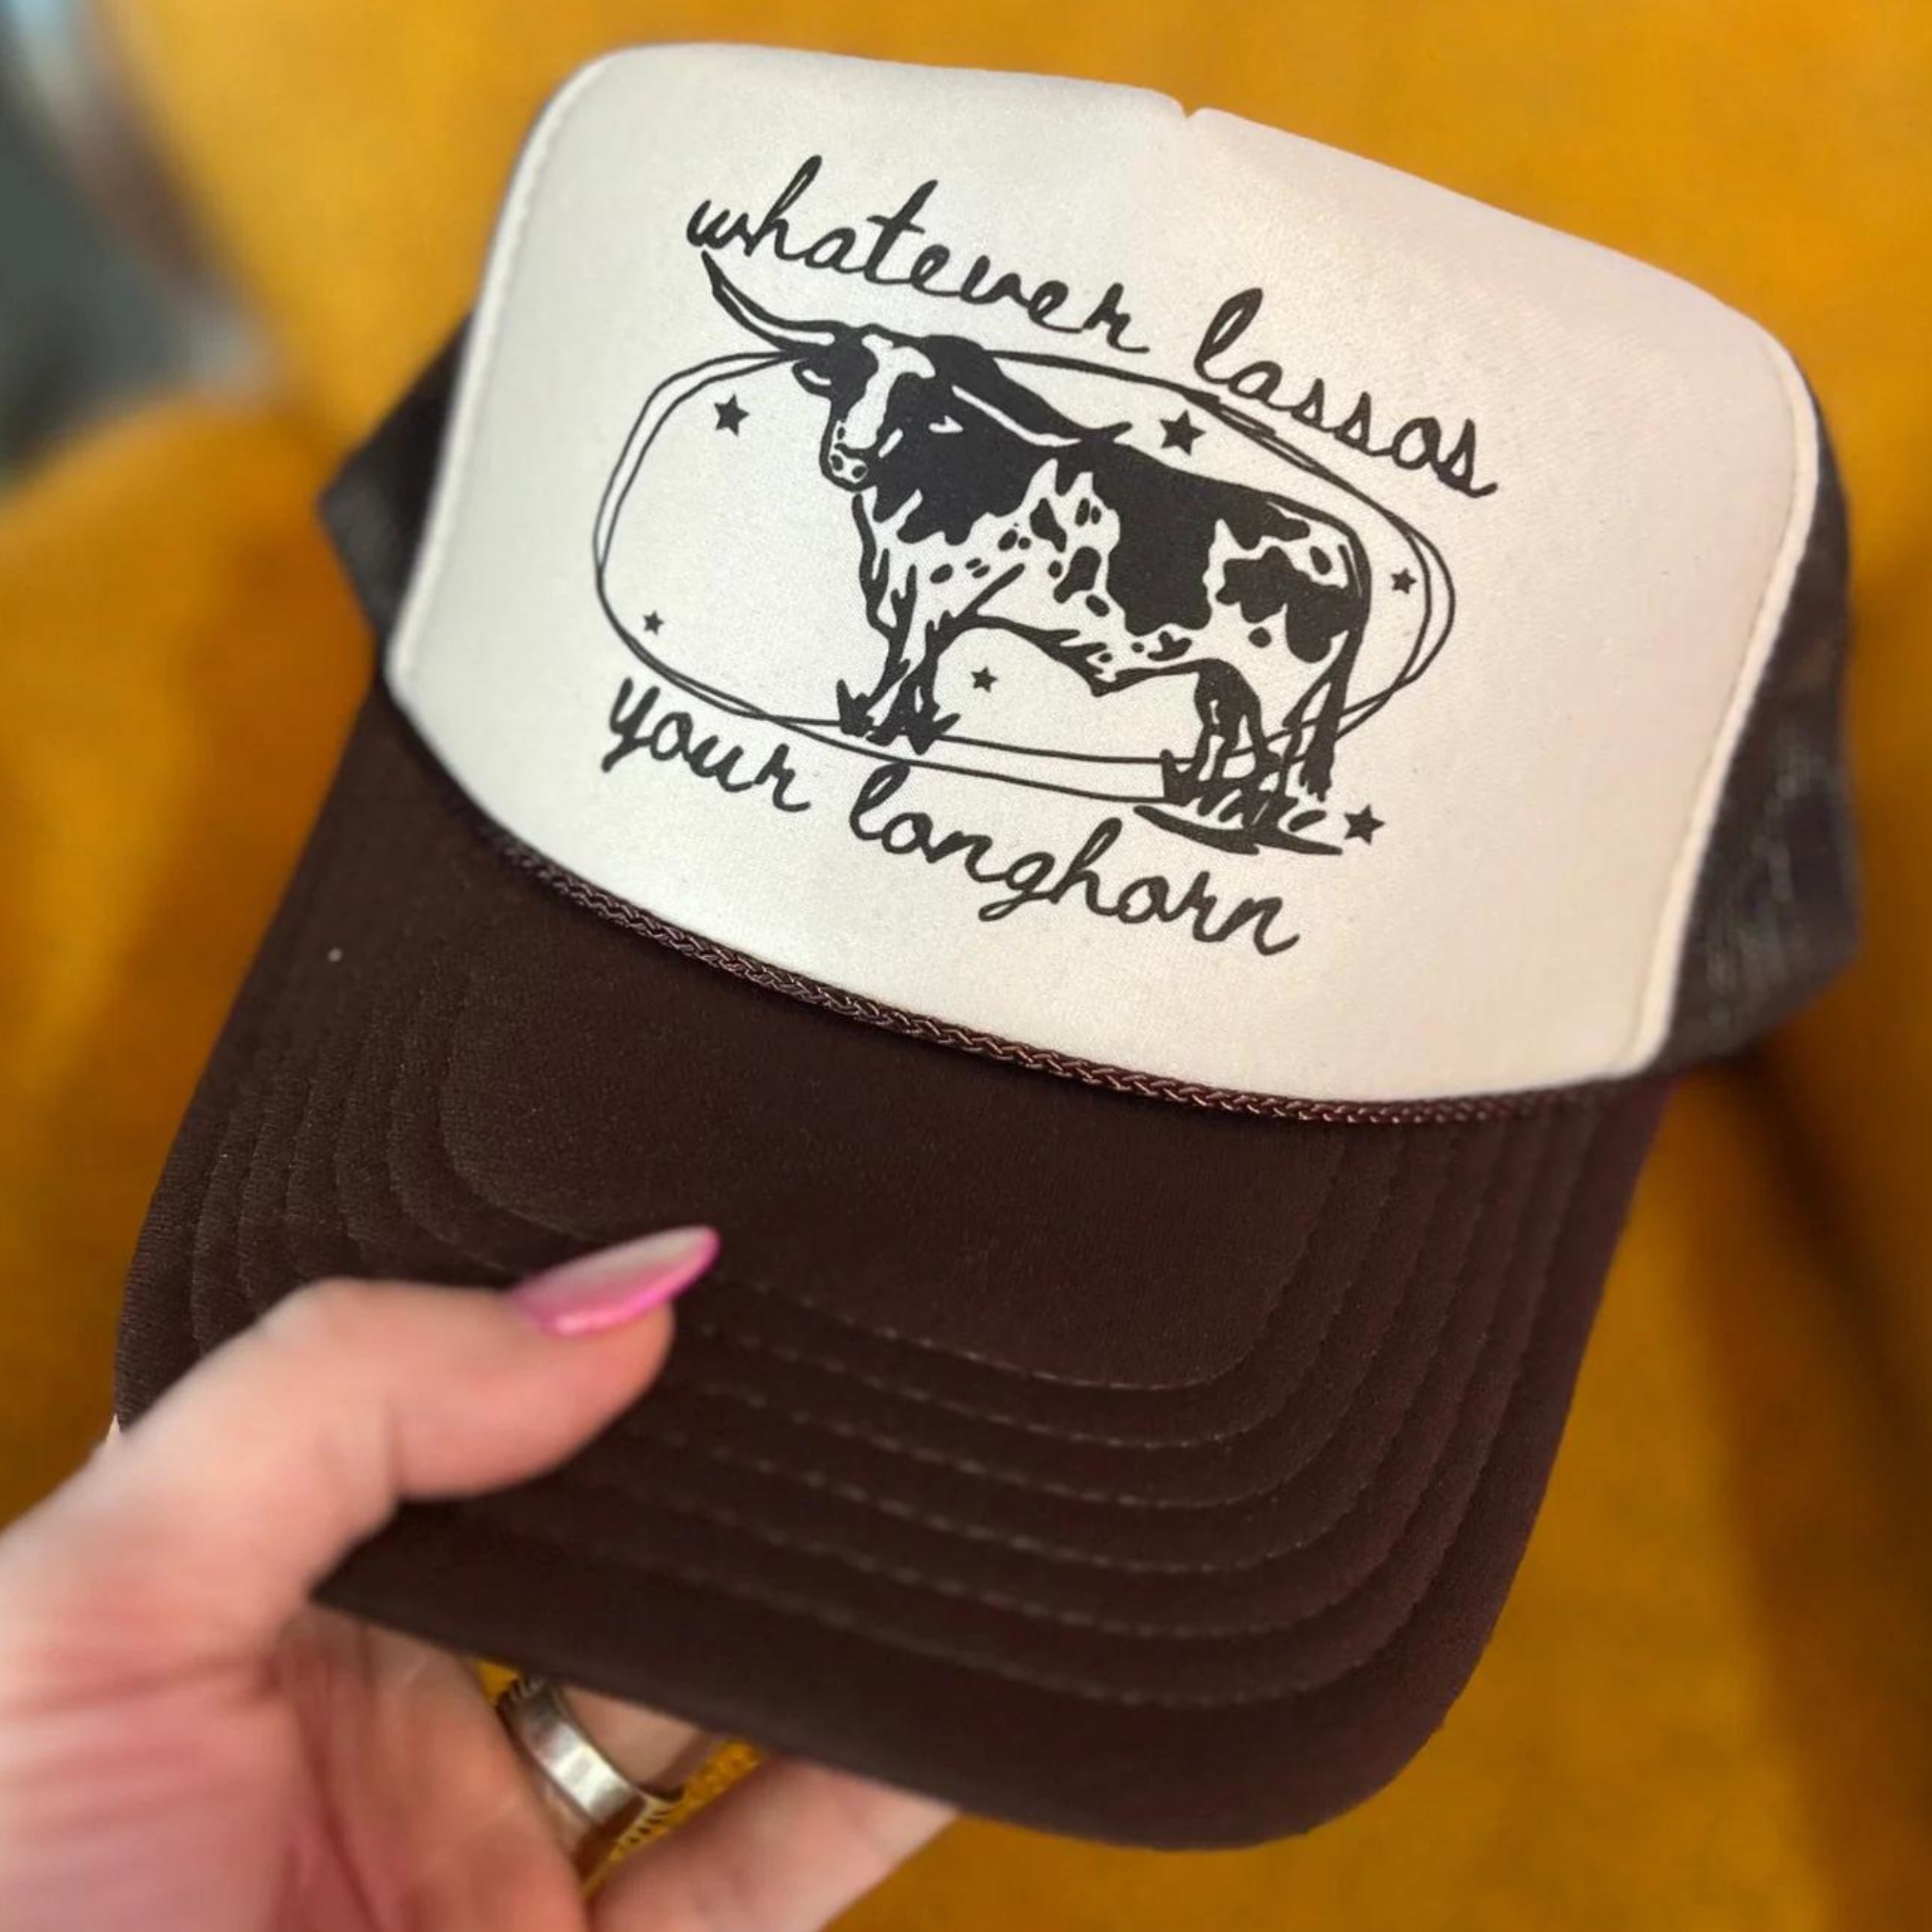 Photo features a brown and cream trucker hat with the words "whatever lassos your longhorn" with a picture of longhorn on the front.